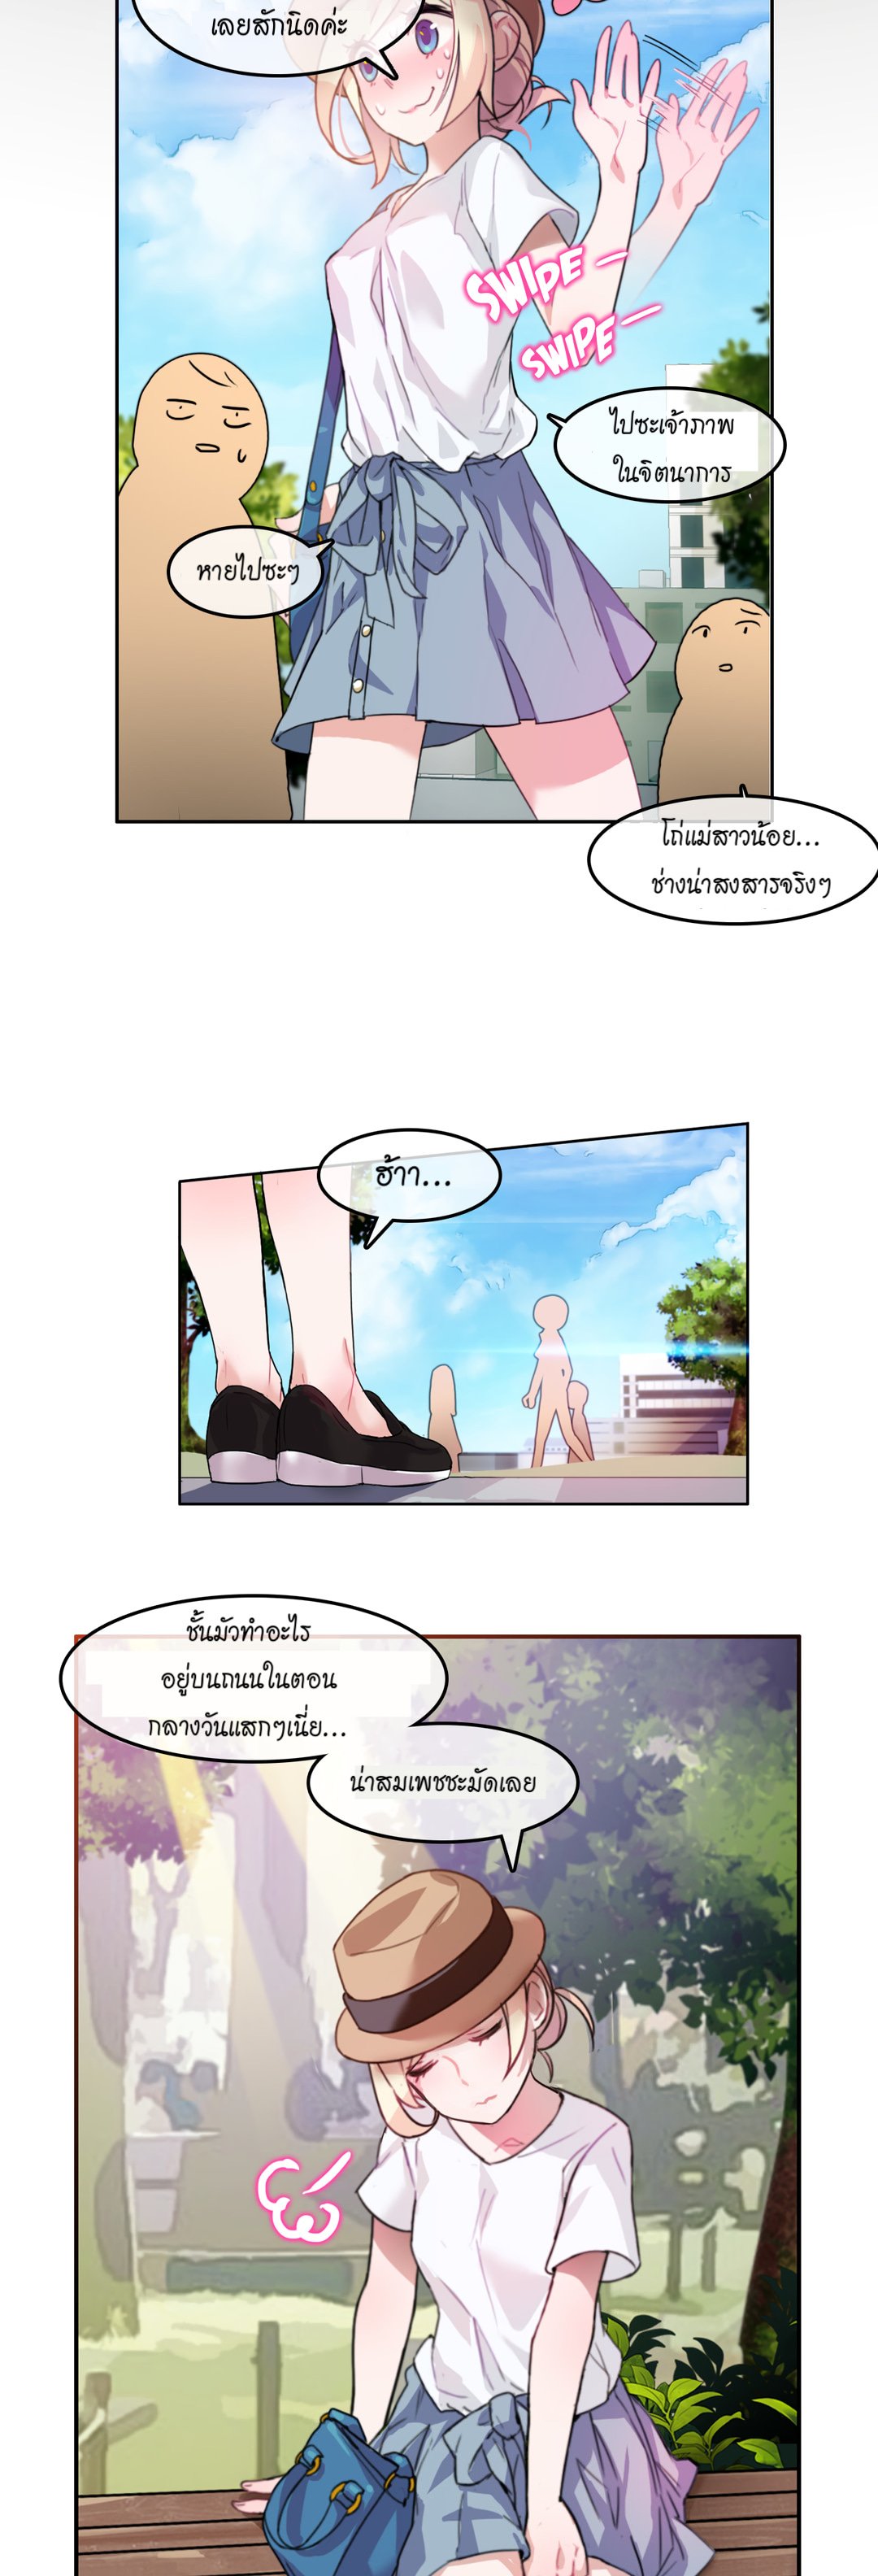 A Pervert’s Daily Life 2 (5)